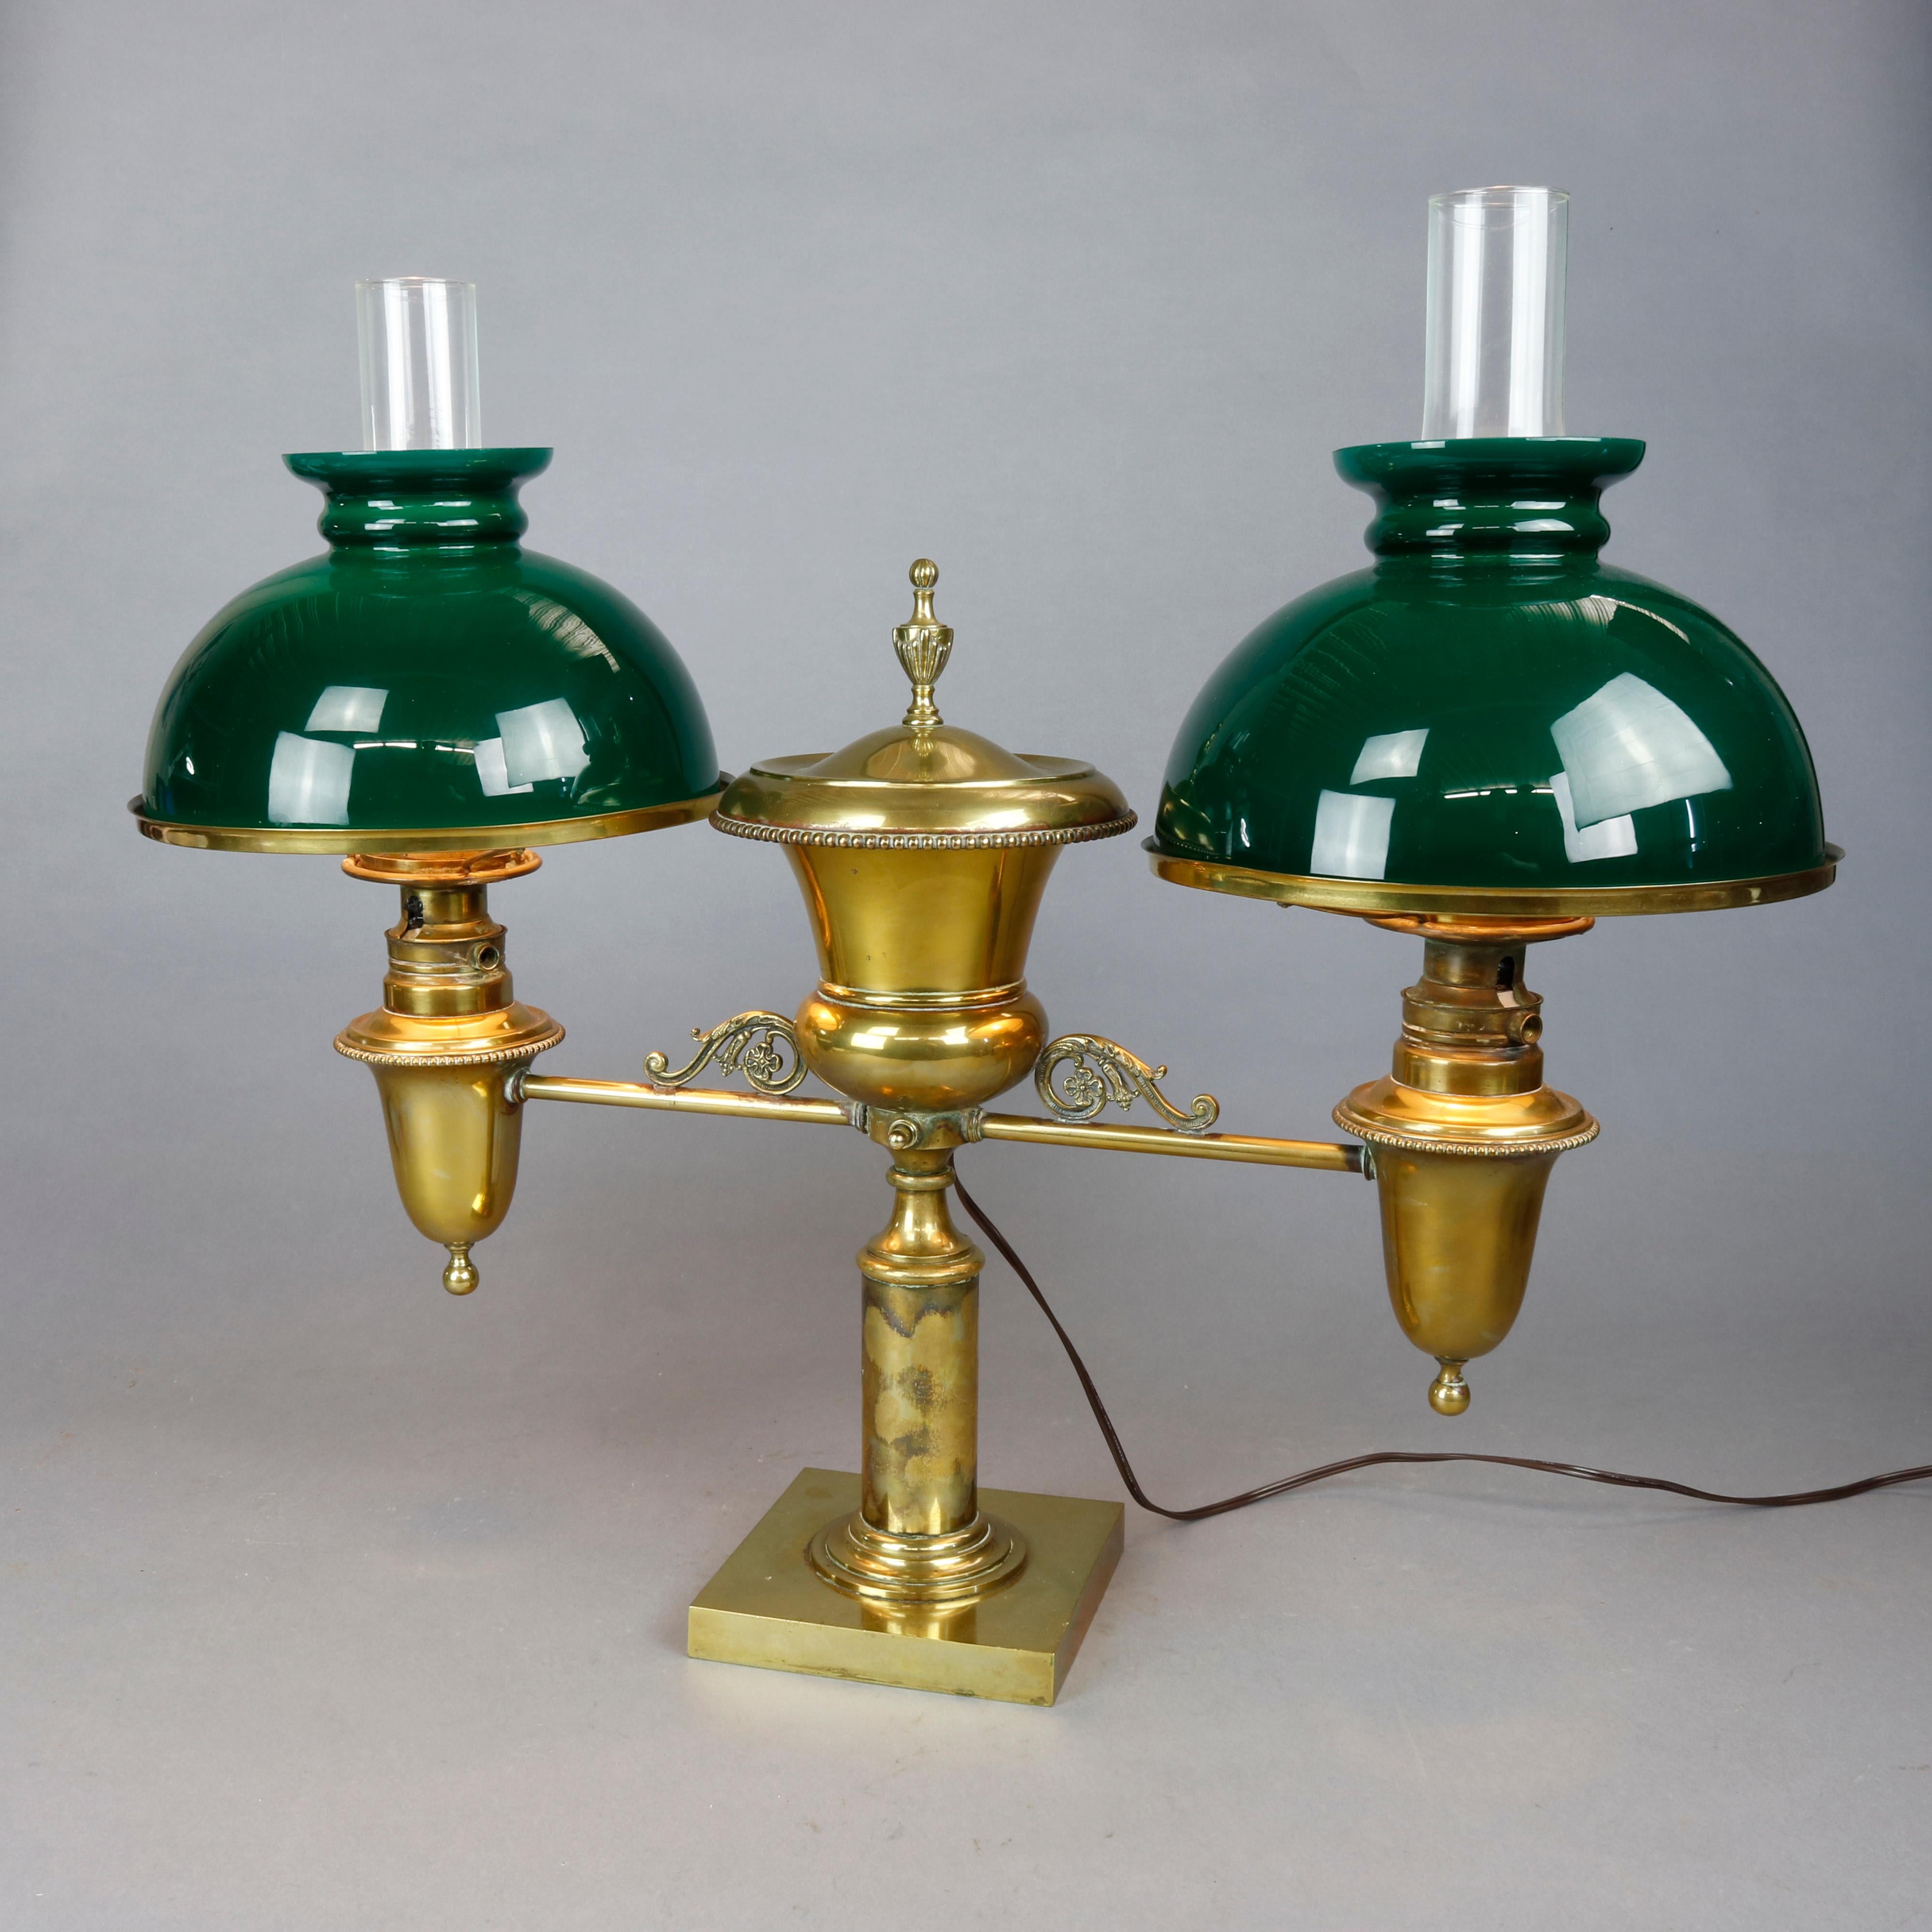 An antique Harvard School student lamp offers brass frame with central Classical urn font having flanking scroll elements and double lights with emerald cased glass shades, electrified and working, circa 1890.

Measures: 23